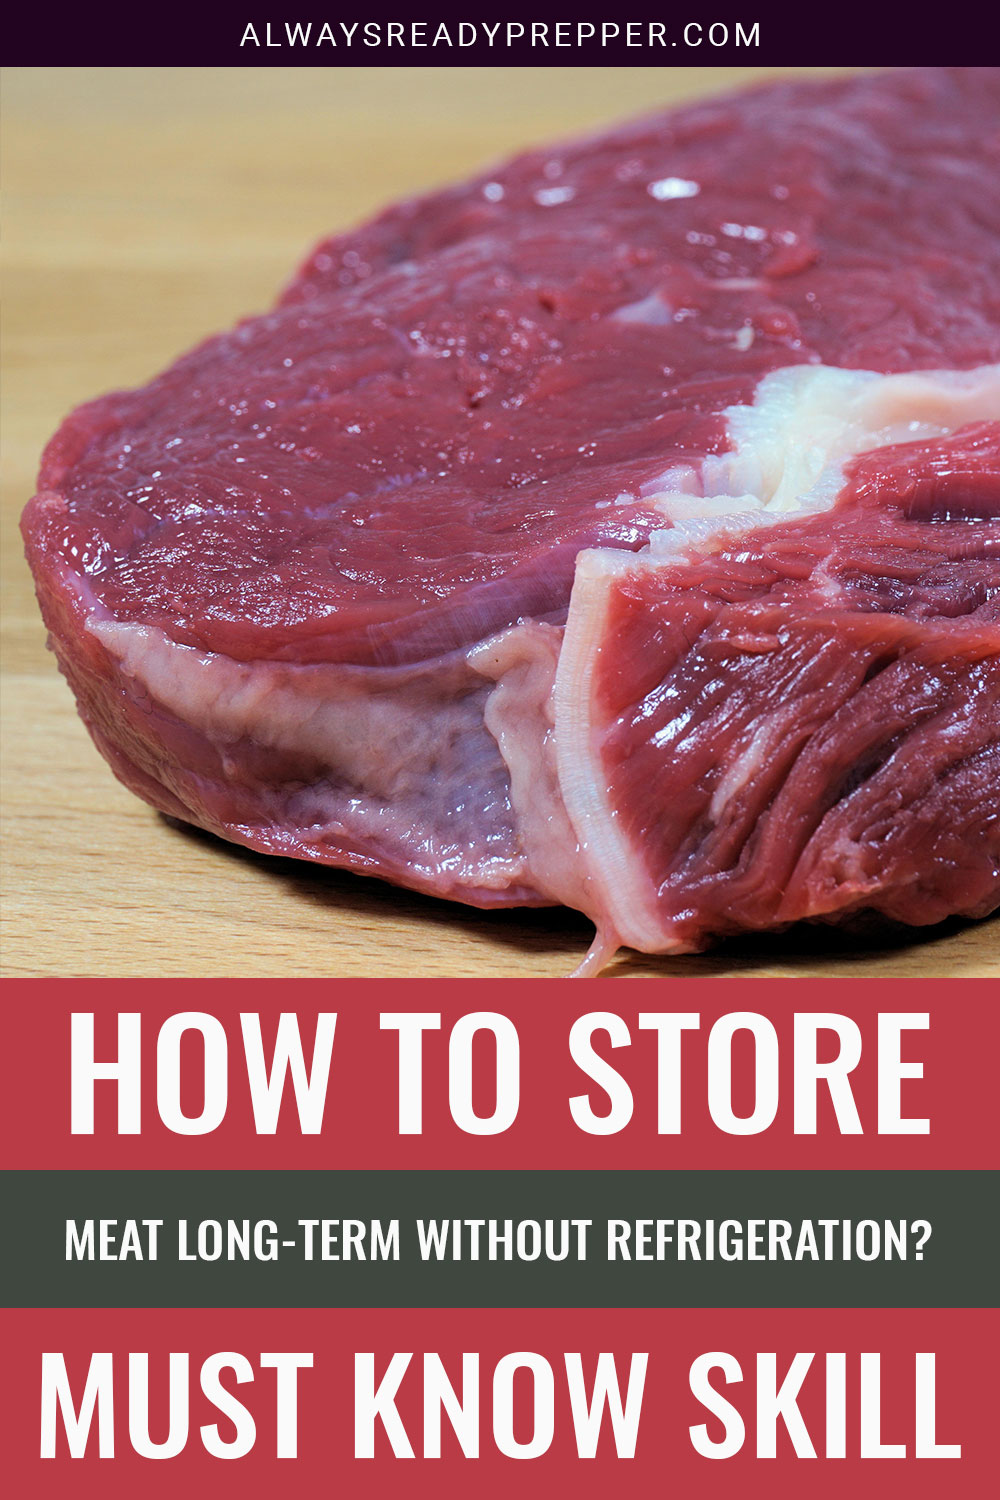 Raw steak on wooden surface - how to store them long-term without refrigeration